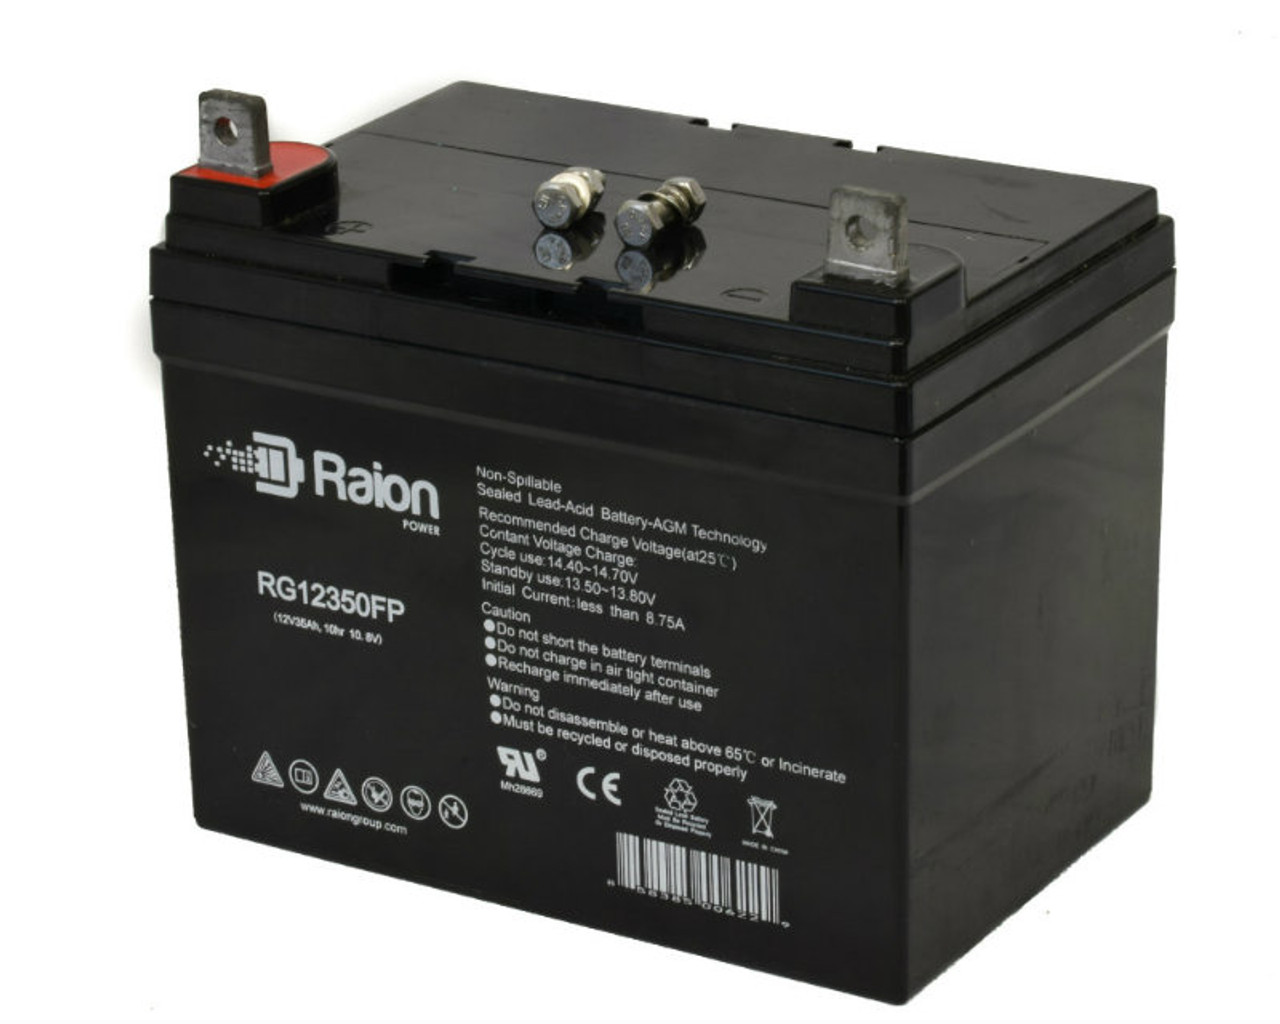 Raion Power Replacement 12V 35Ah RG12350FP Mobility Scooter Battery for IMC Heartway Bolero PF2